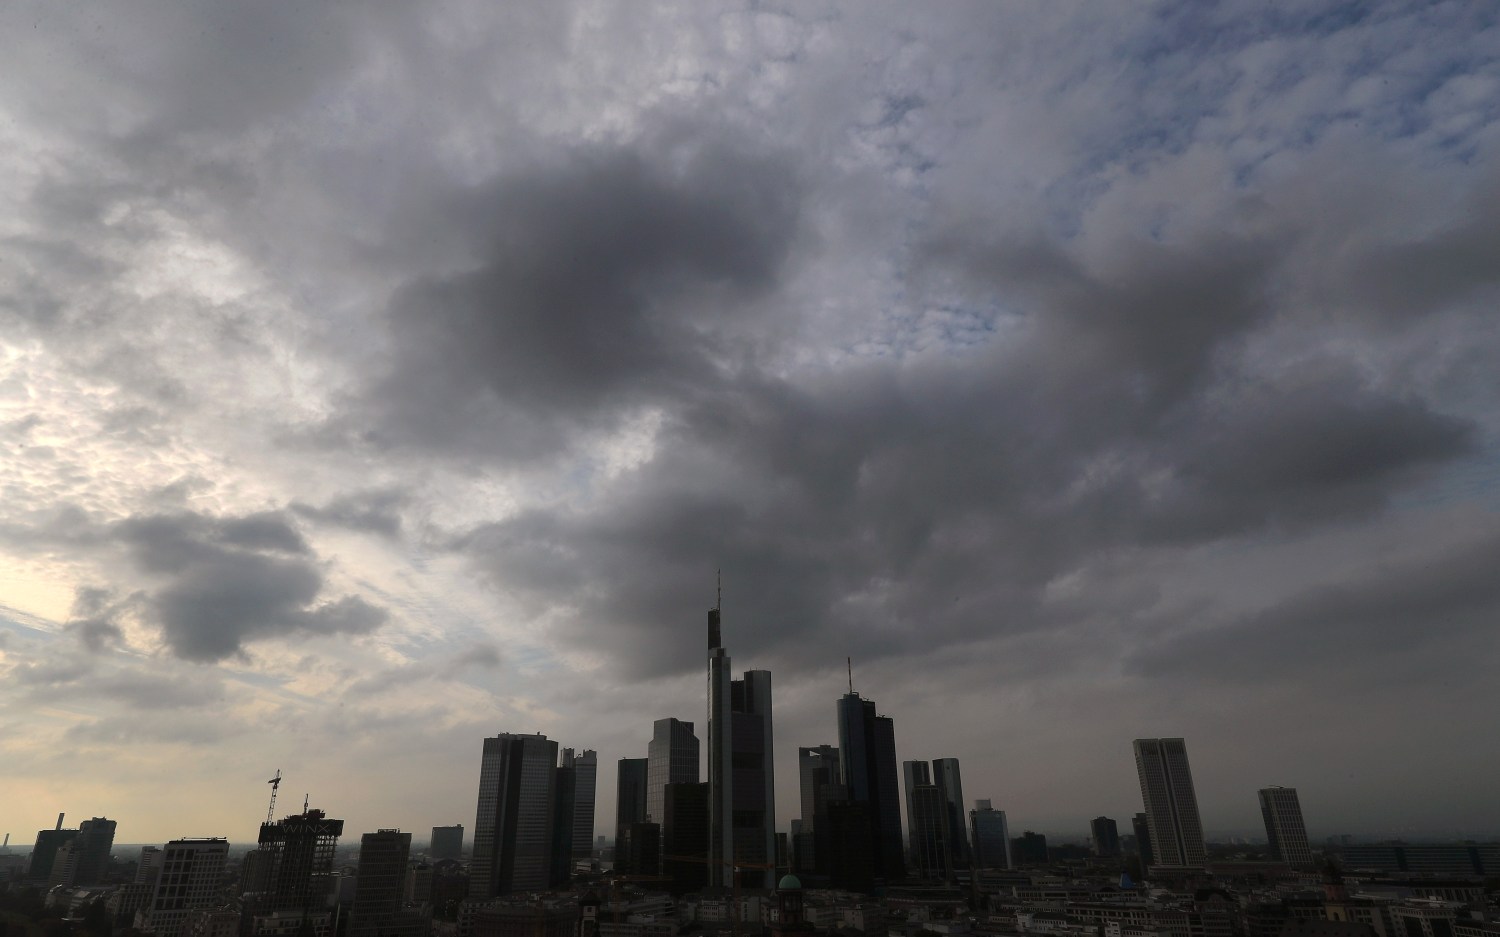 Dark clouds are seen over the skyline with its bank towers in Frankfurt, Germany, October 23, 2016.   REUTERS/Kai Pfaffenbach  - S1AEUIQXGVAA